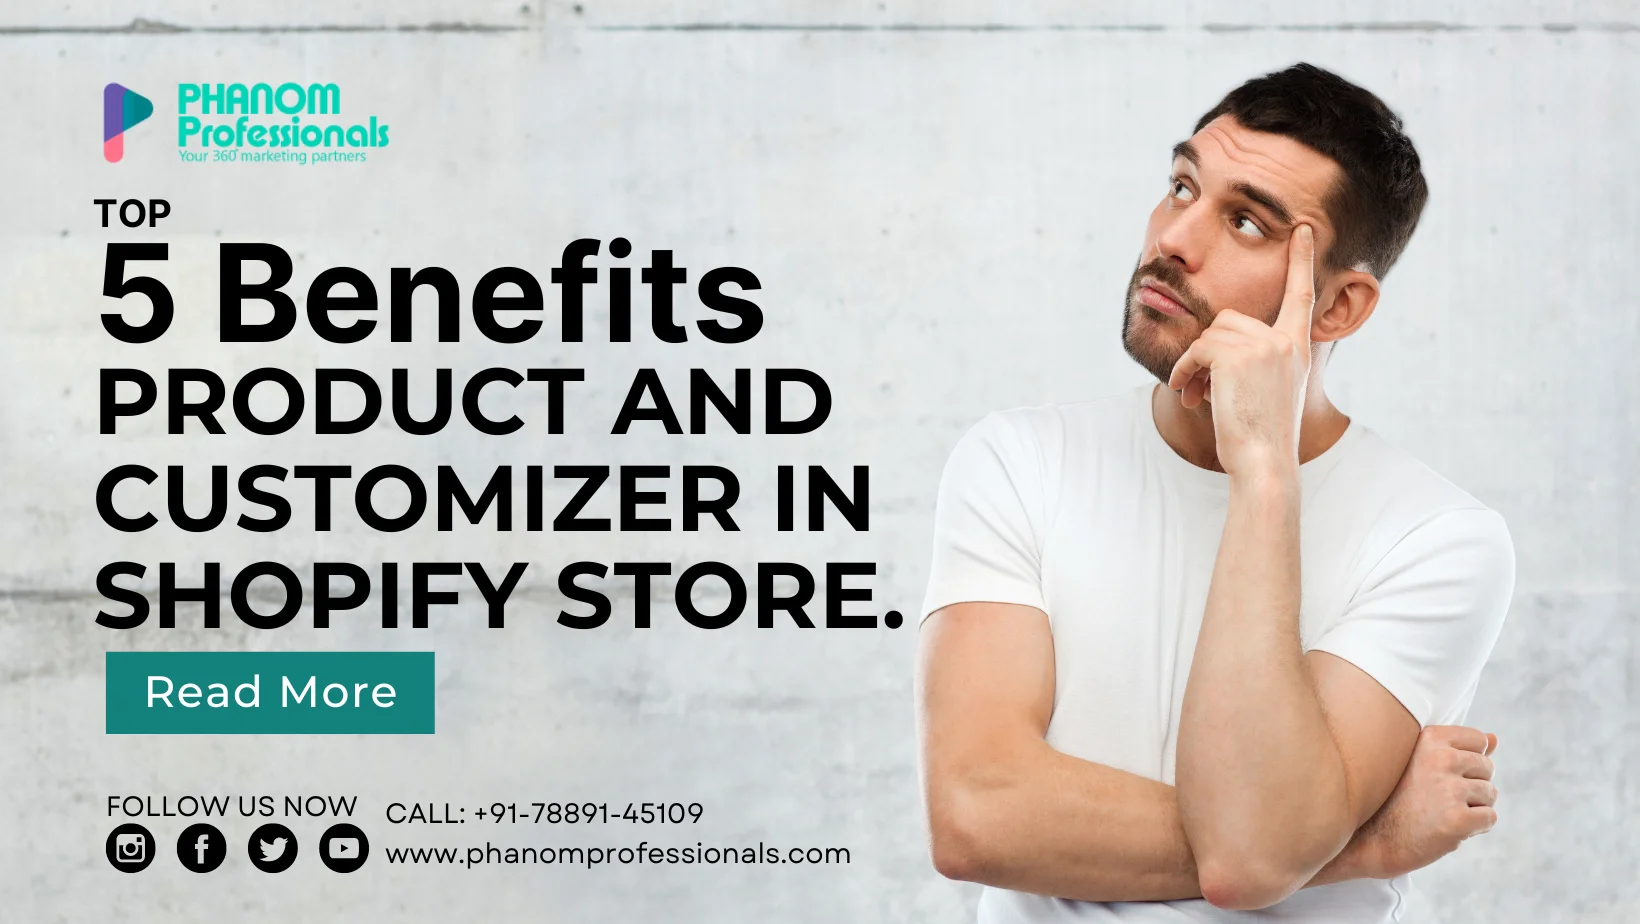 Top 5 Benefits of Product and Customizer in Shopify Store.